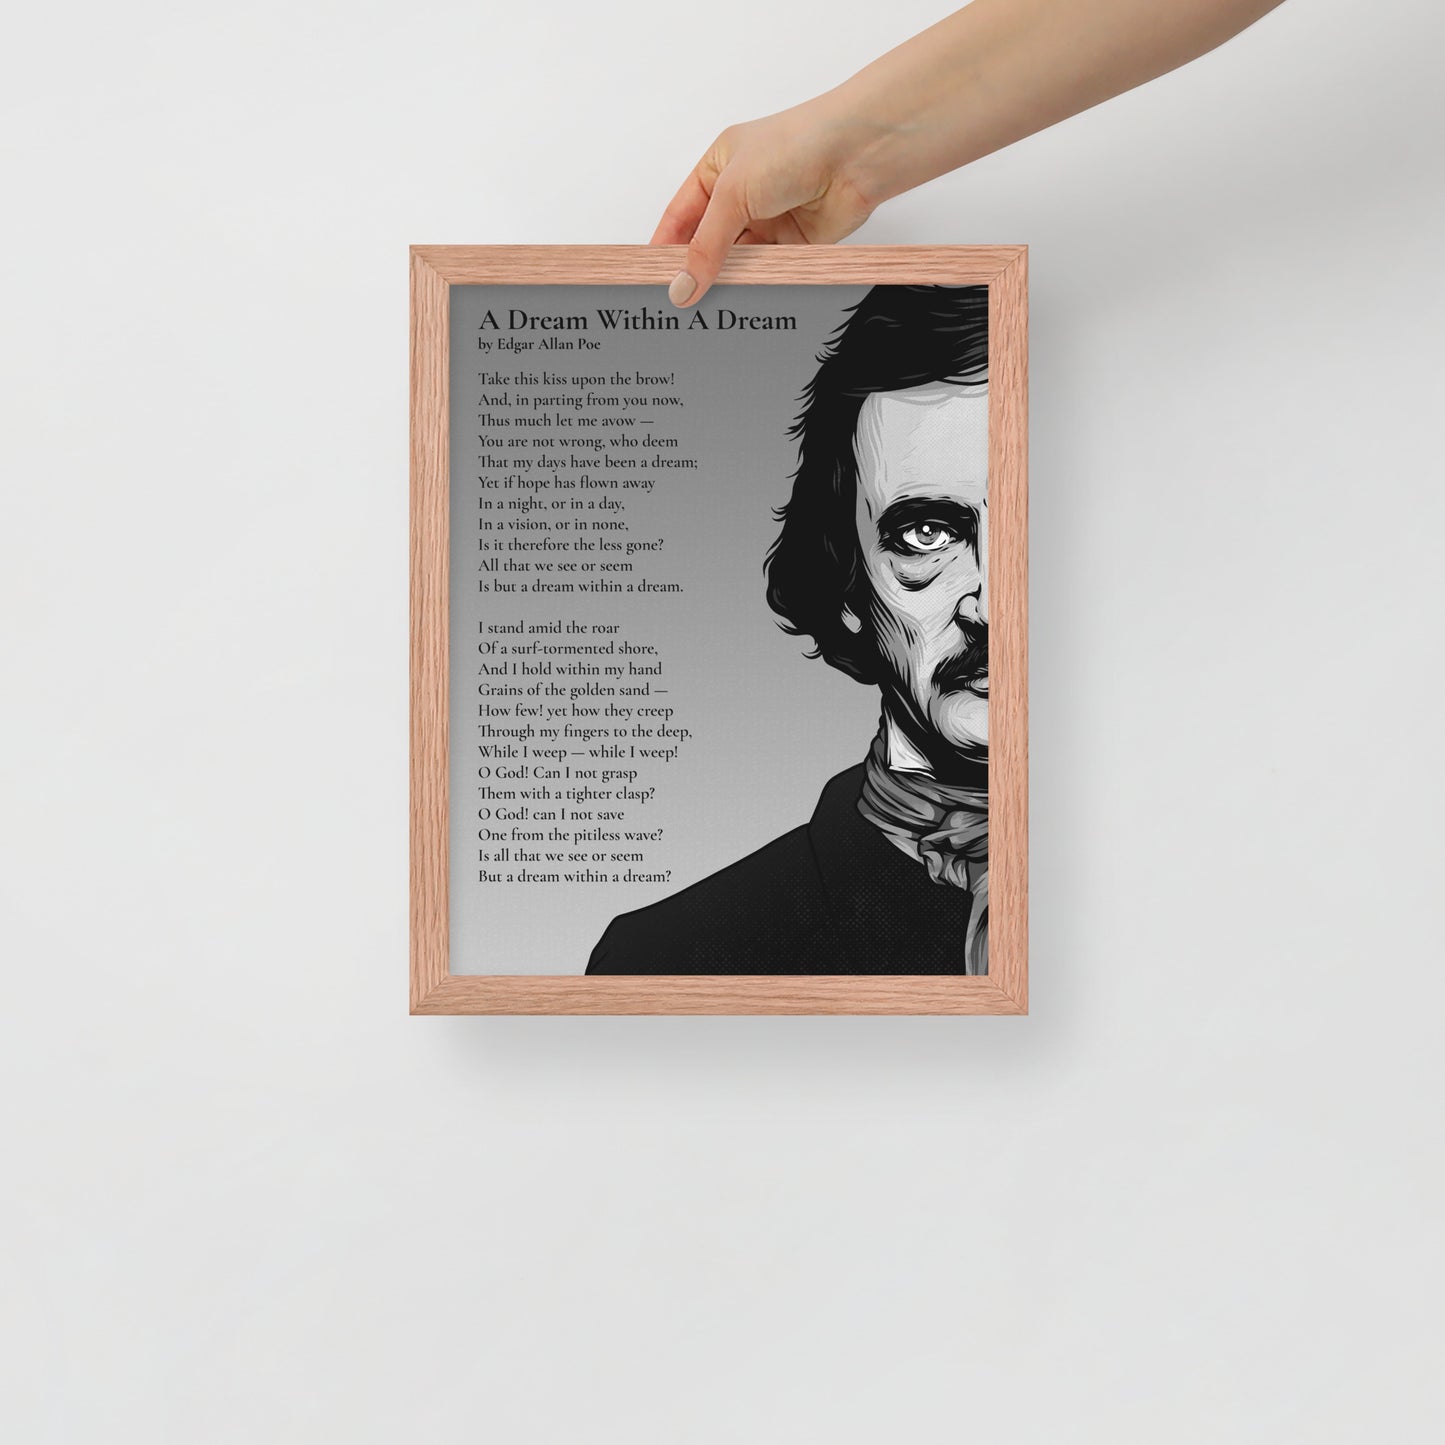 Edgar Allan Poe's 'A Dream Within a Dream' Framed Matted Poster - 11 x 14 Red Oak Frame